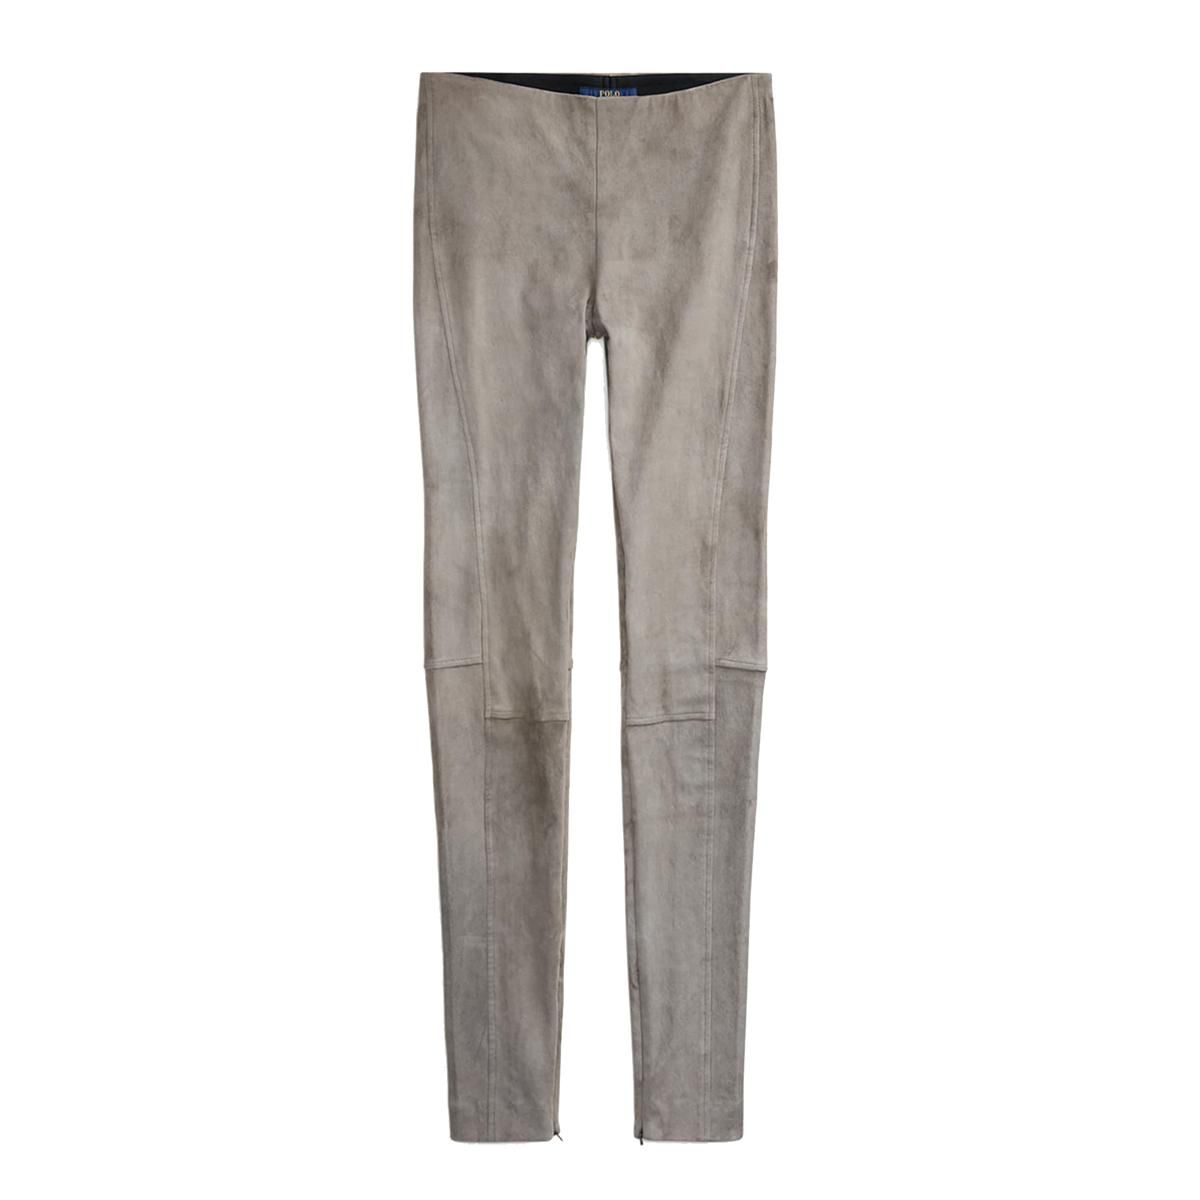 polo ralph lauren leland stretch suede skinny pants